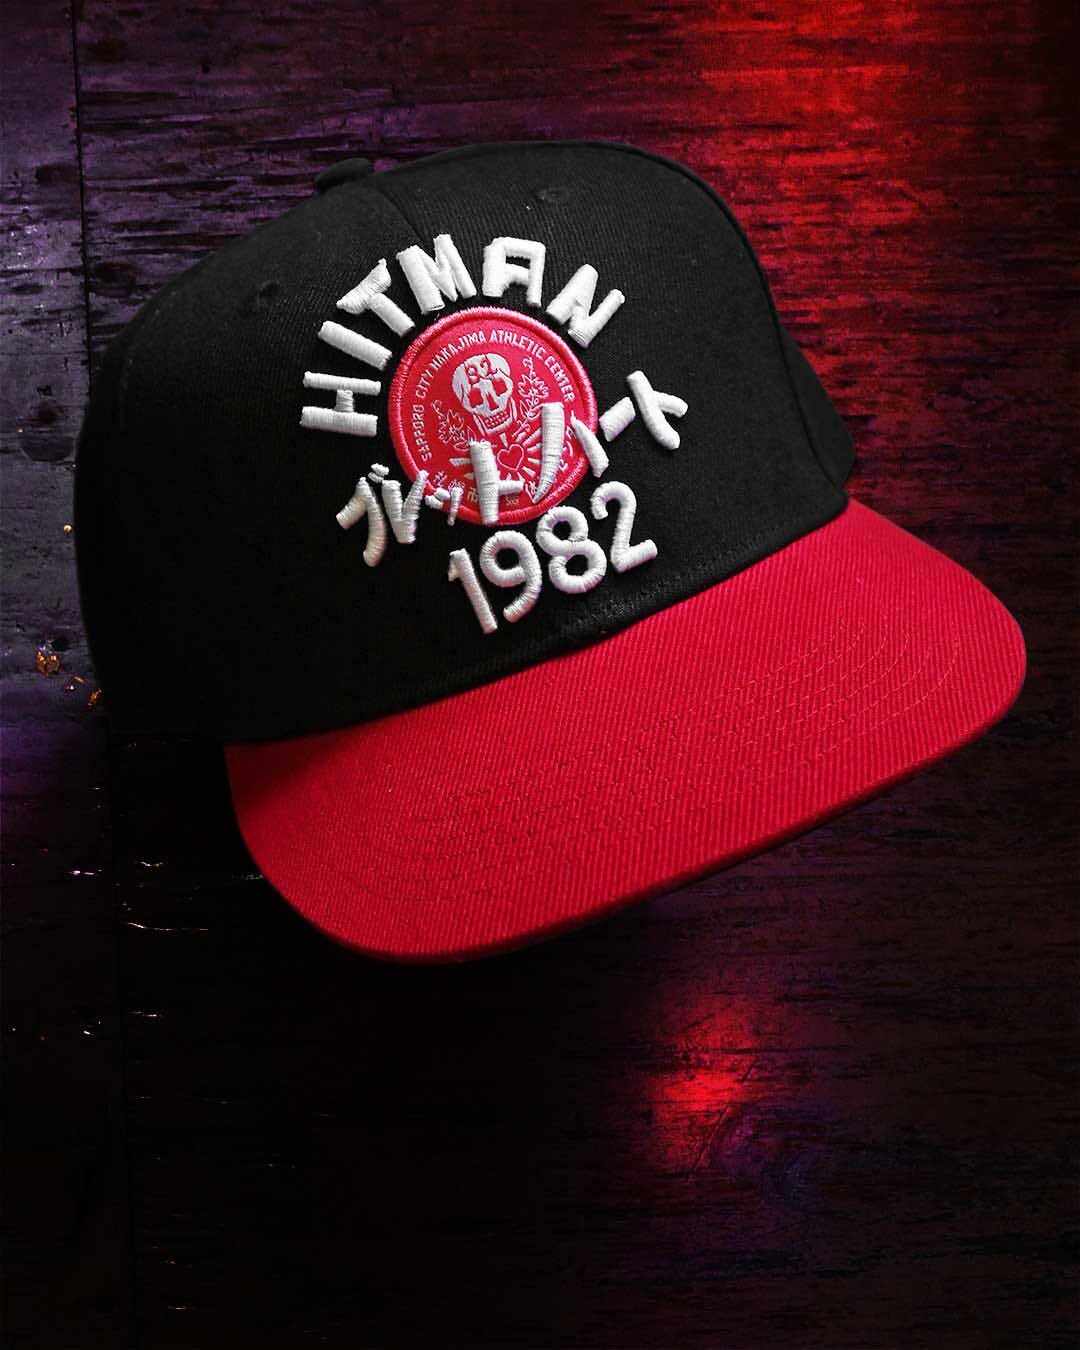 Bret Hart Japan Snapback Hat - Roots of Fight Canada